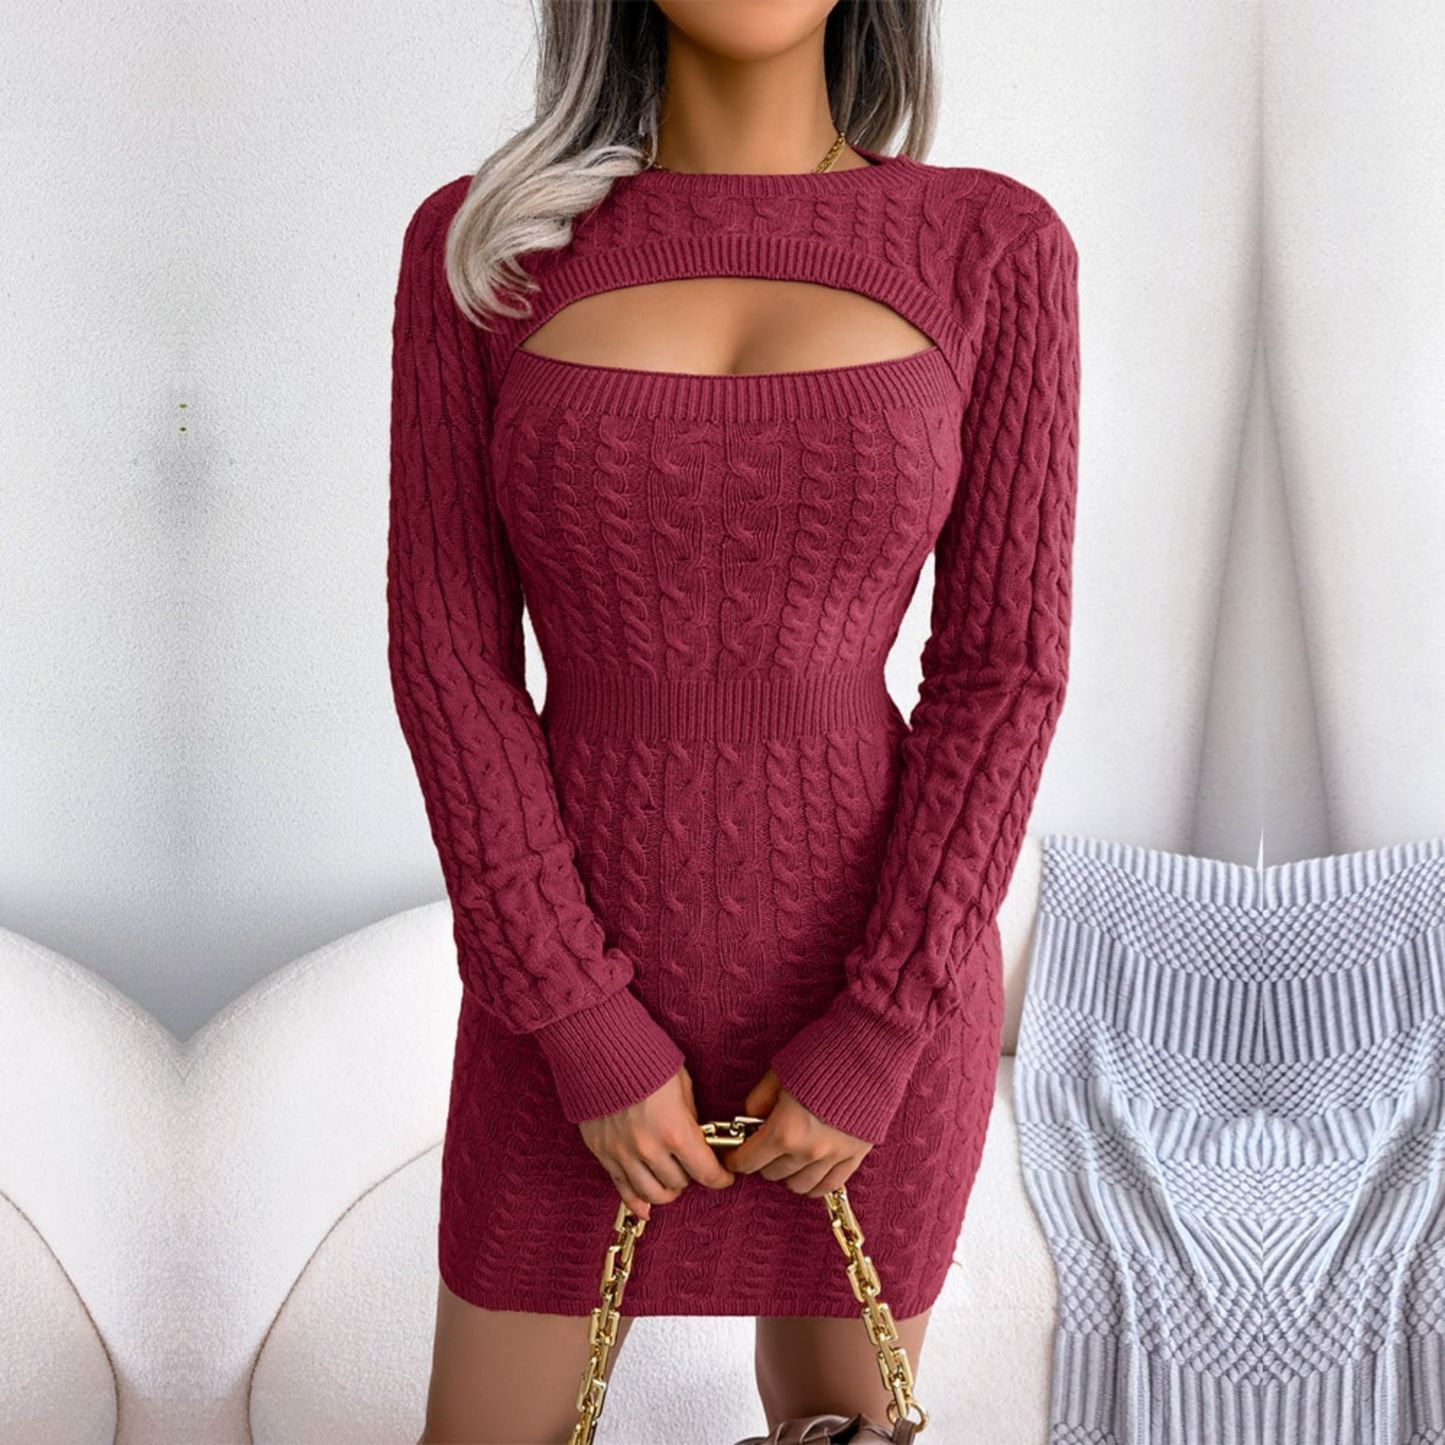 Loyalty - Burgundy Braided Cutout Knitted Dress - Model Mannequin